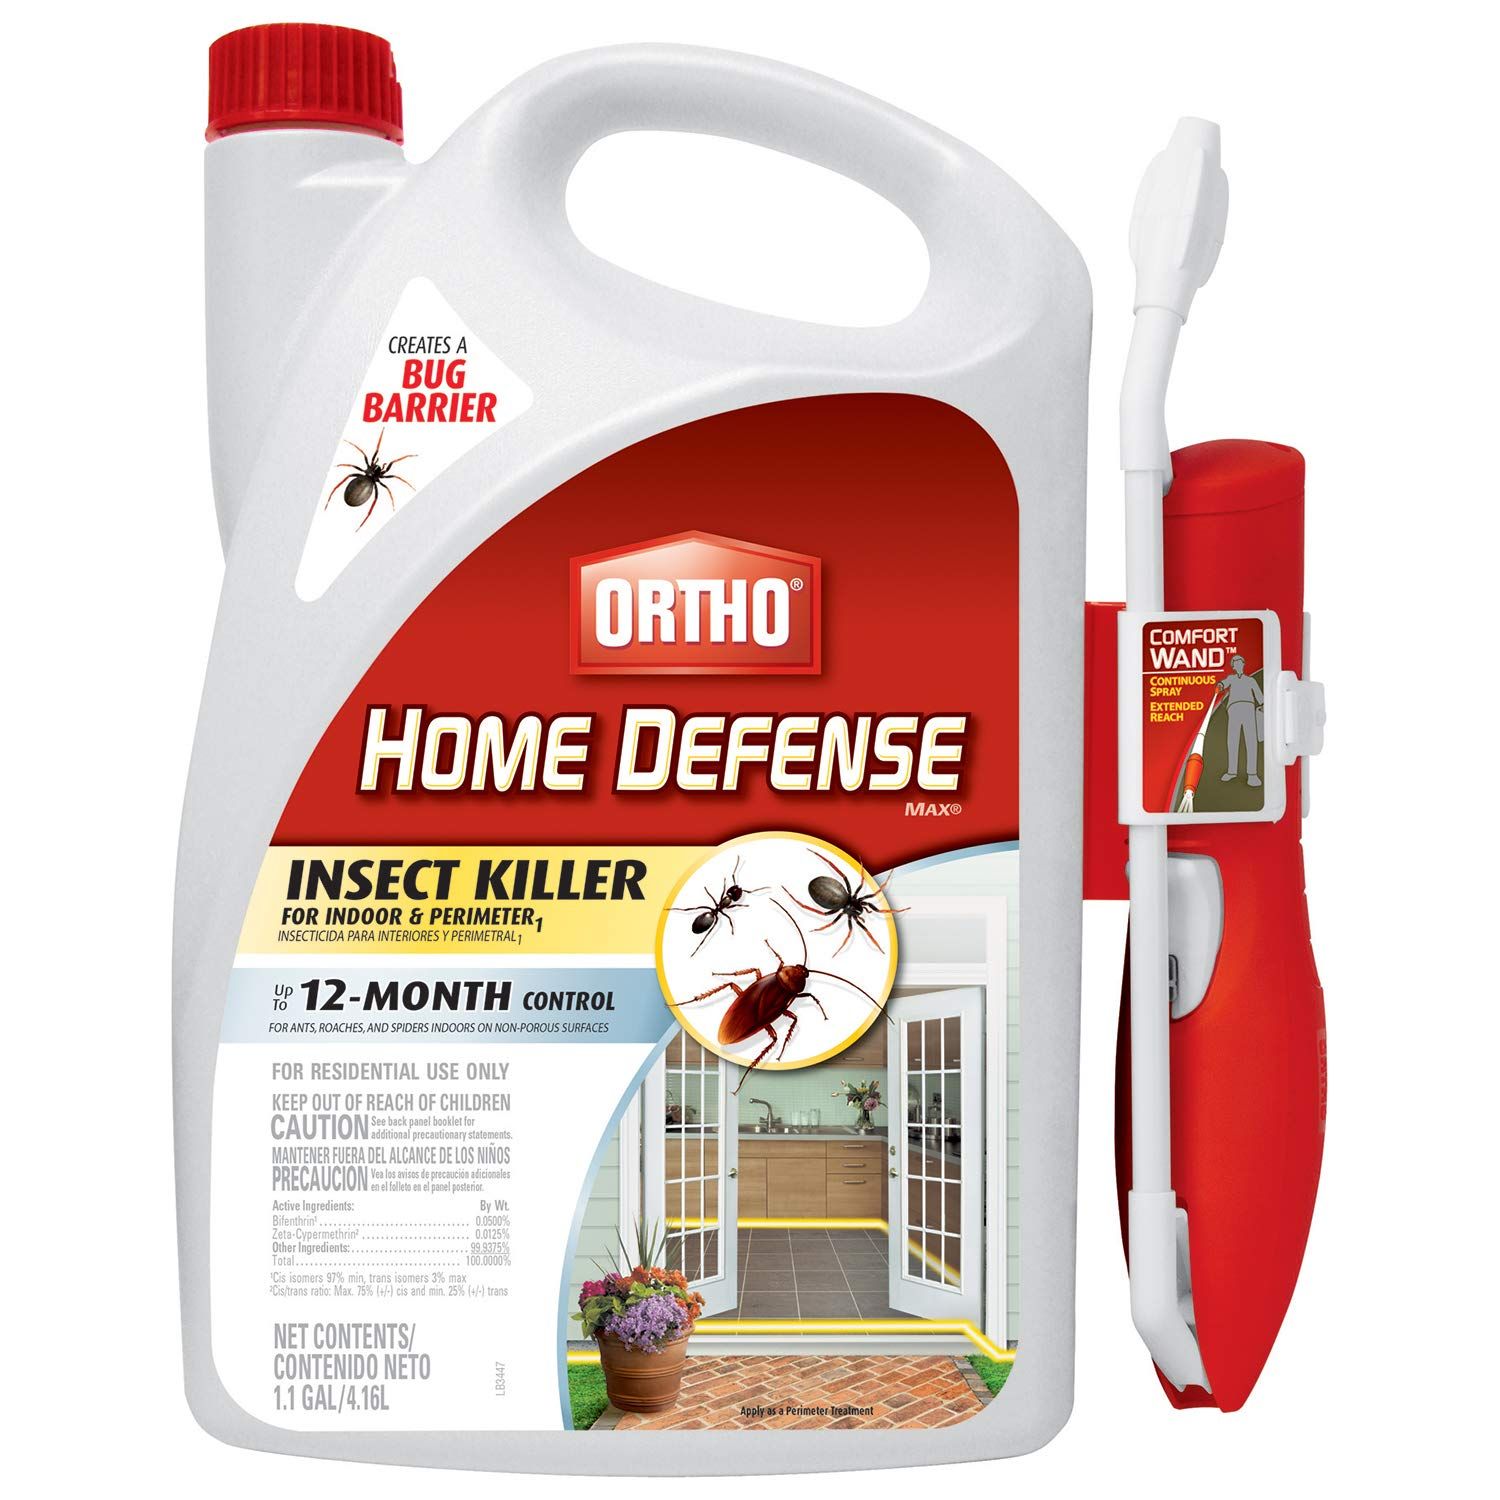 Ortho Home Defense MAX Insect Killer for Indoor & Perimeter1 with Comfort Wand - Kills Ants, Cock... | Amazon (US)